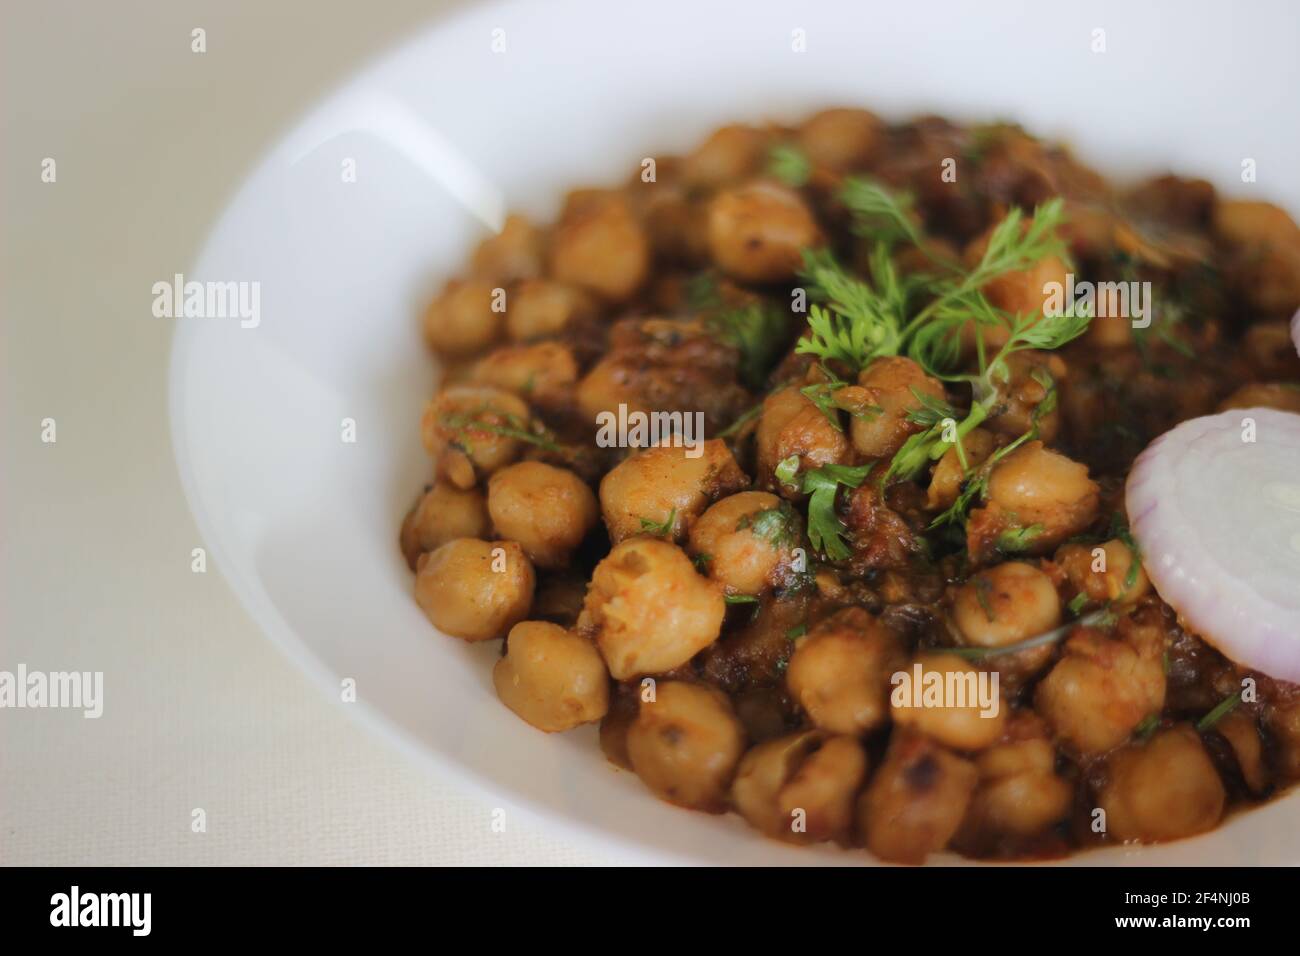 Spicy white chickpea gravy made by soaking chickpea overnight and cooked in a gravy of onions, tomatoes, ginger, garlic and spices. Shot on white back Stock Photo